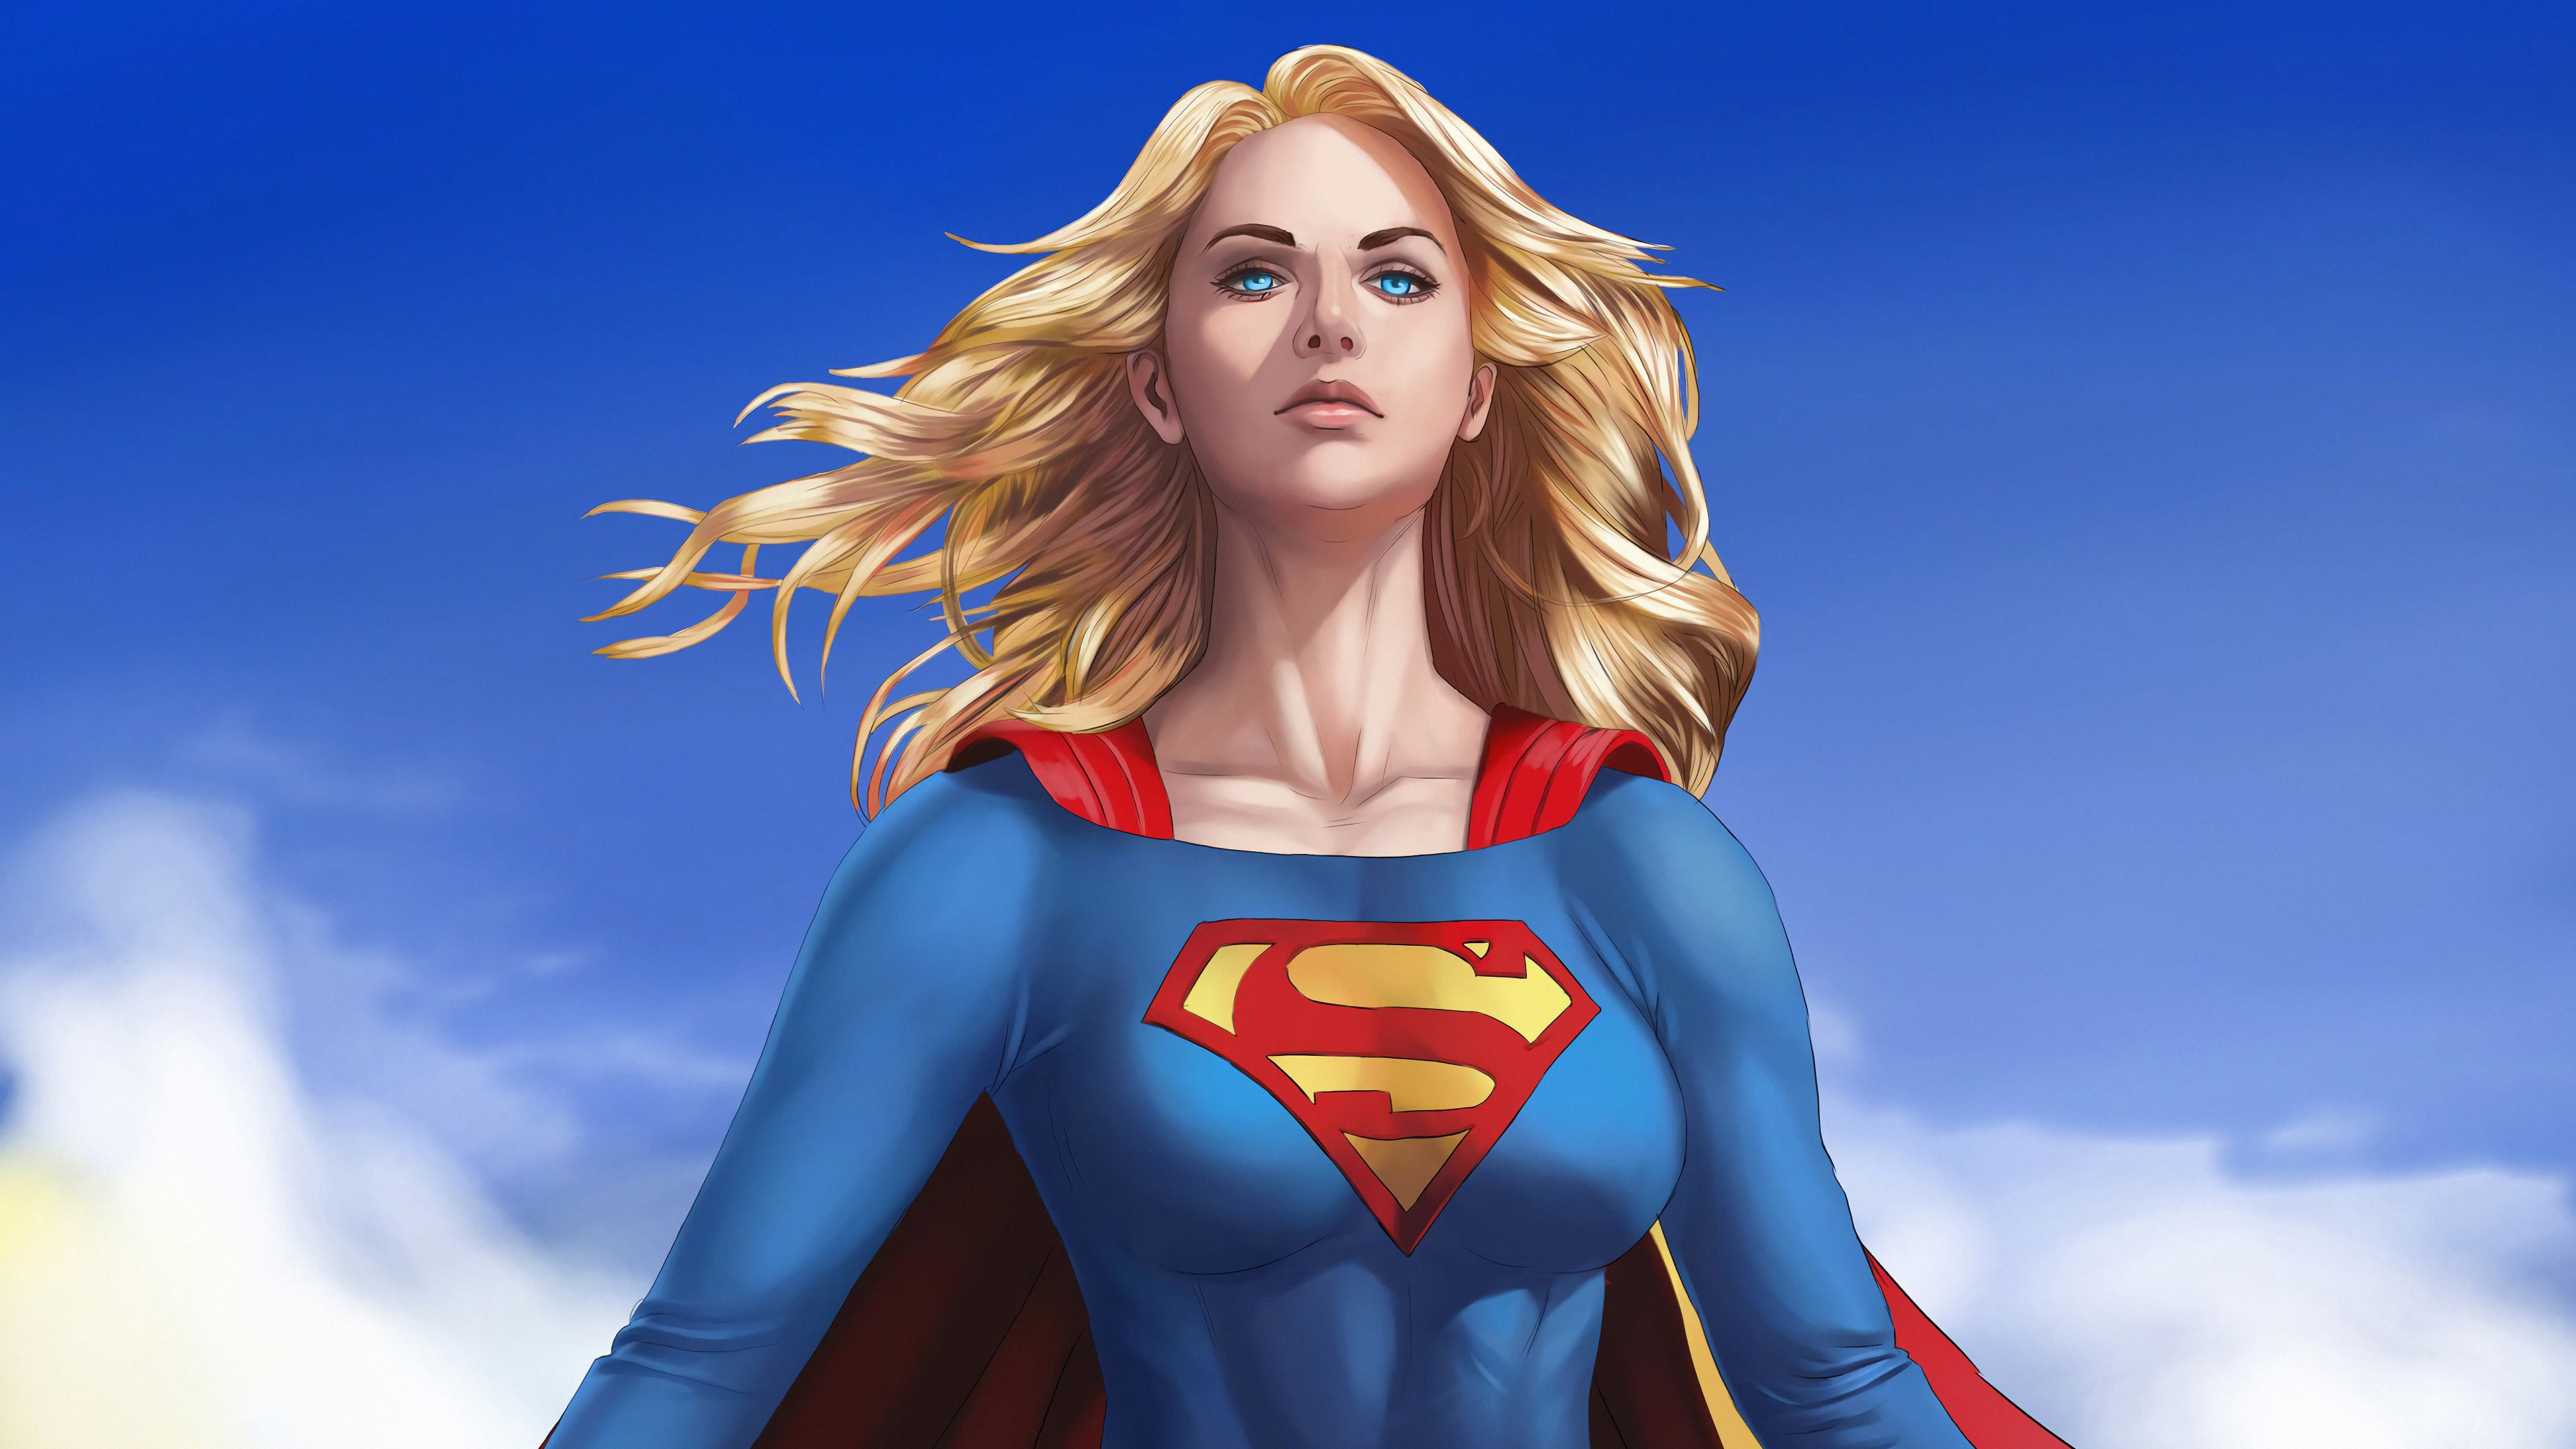 Supergirl HD Wallpapers and Backgrounds. 